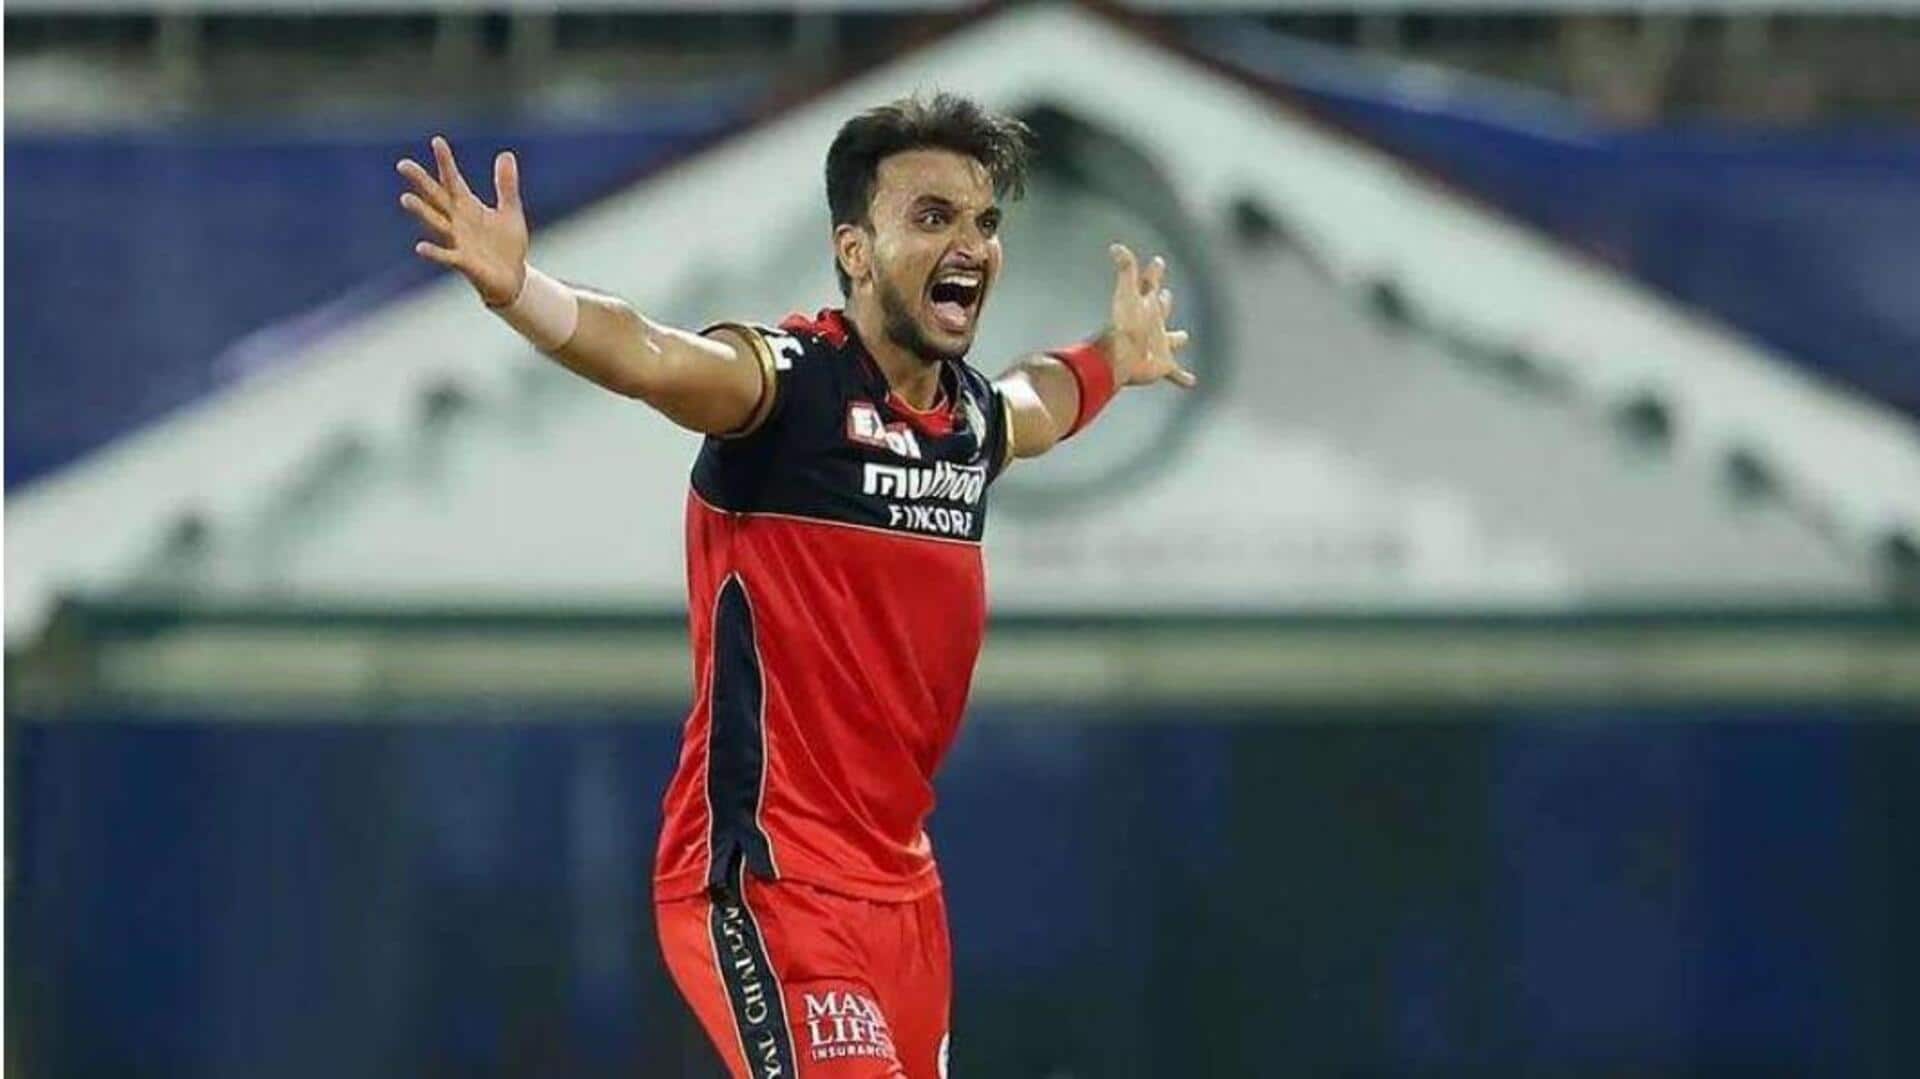 RCB to trade 2 stars ahead of Auction